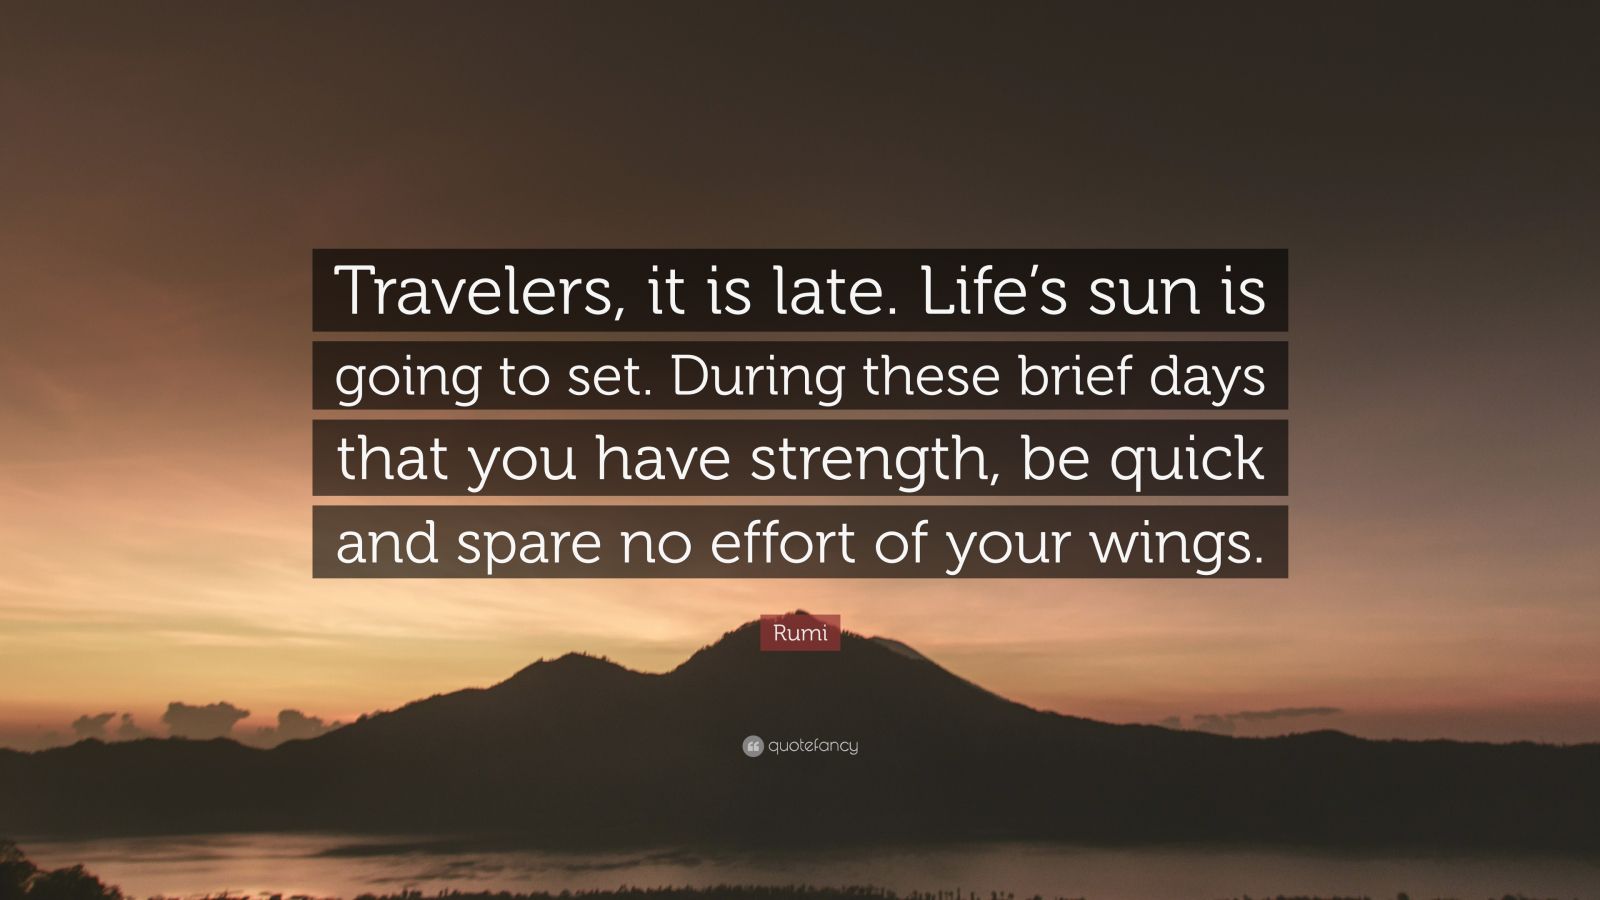 Rumi Quote: “Travelers, it is late. Life’s sun is going to set. During